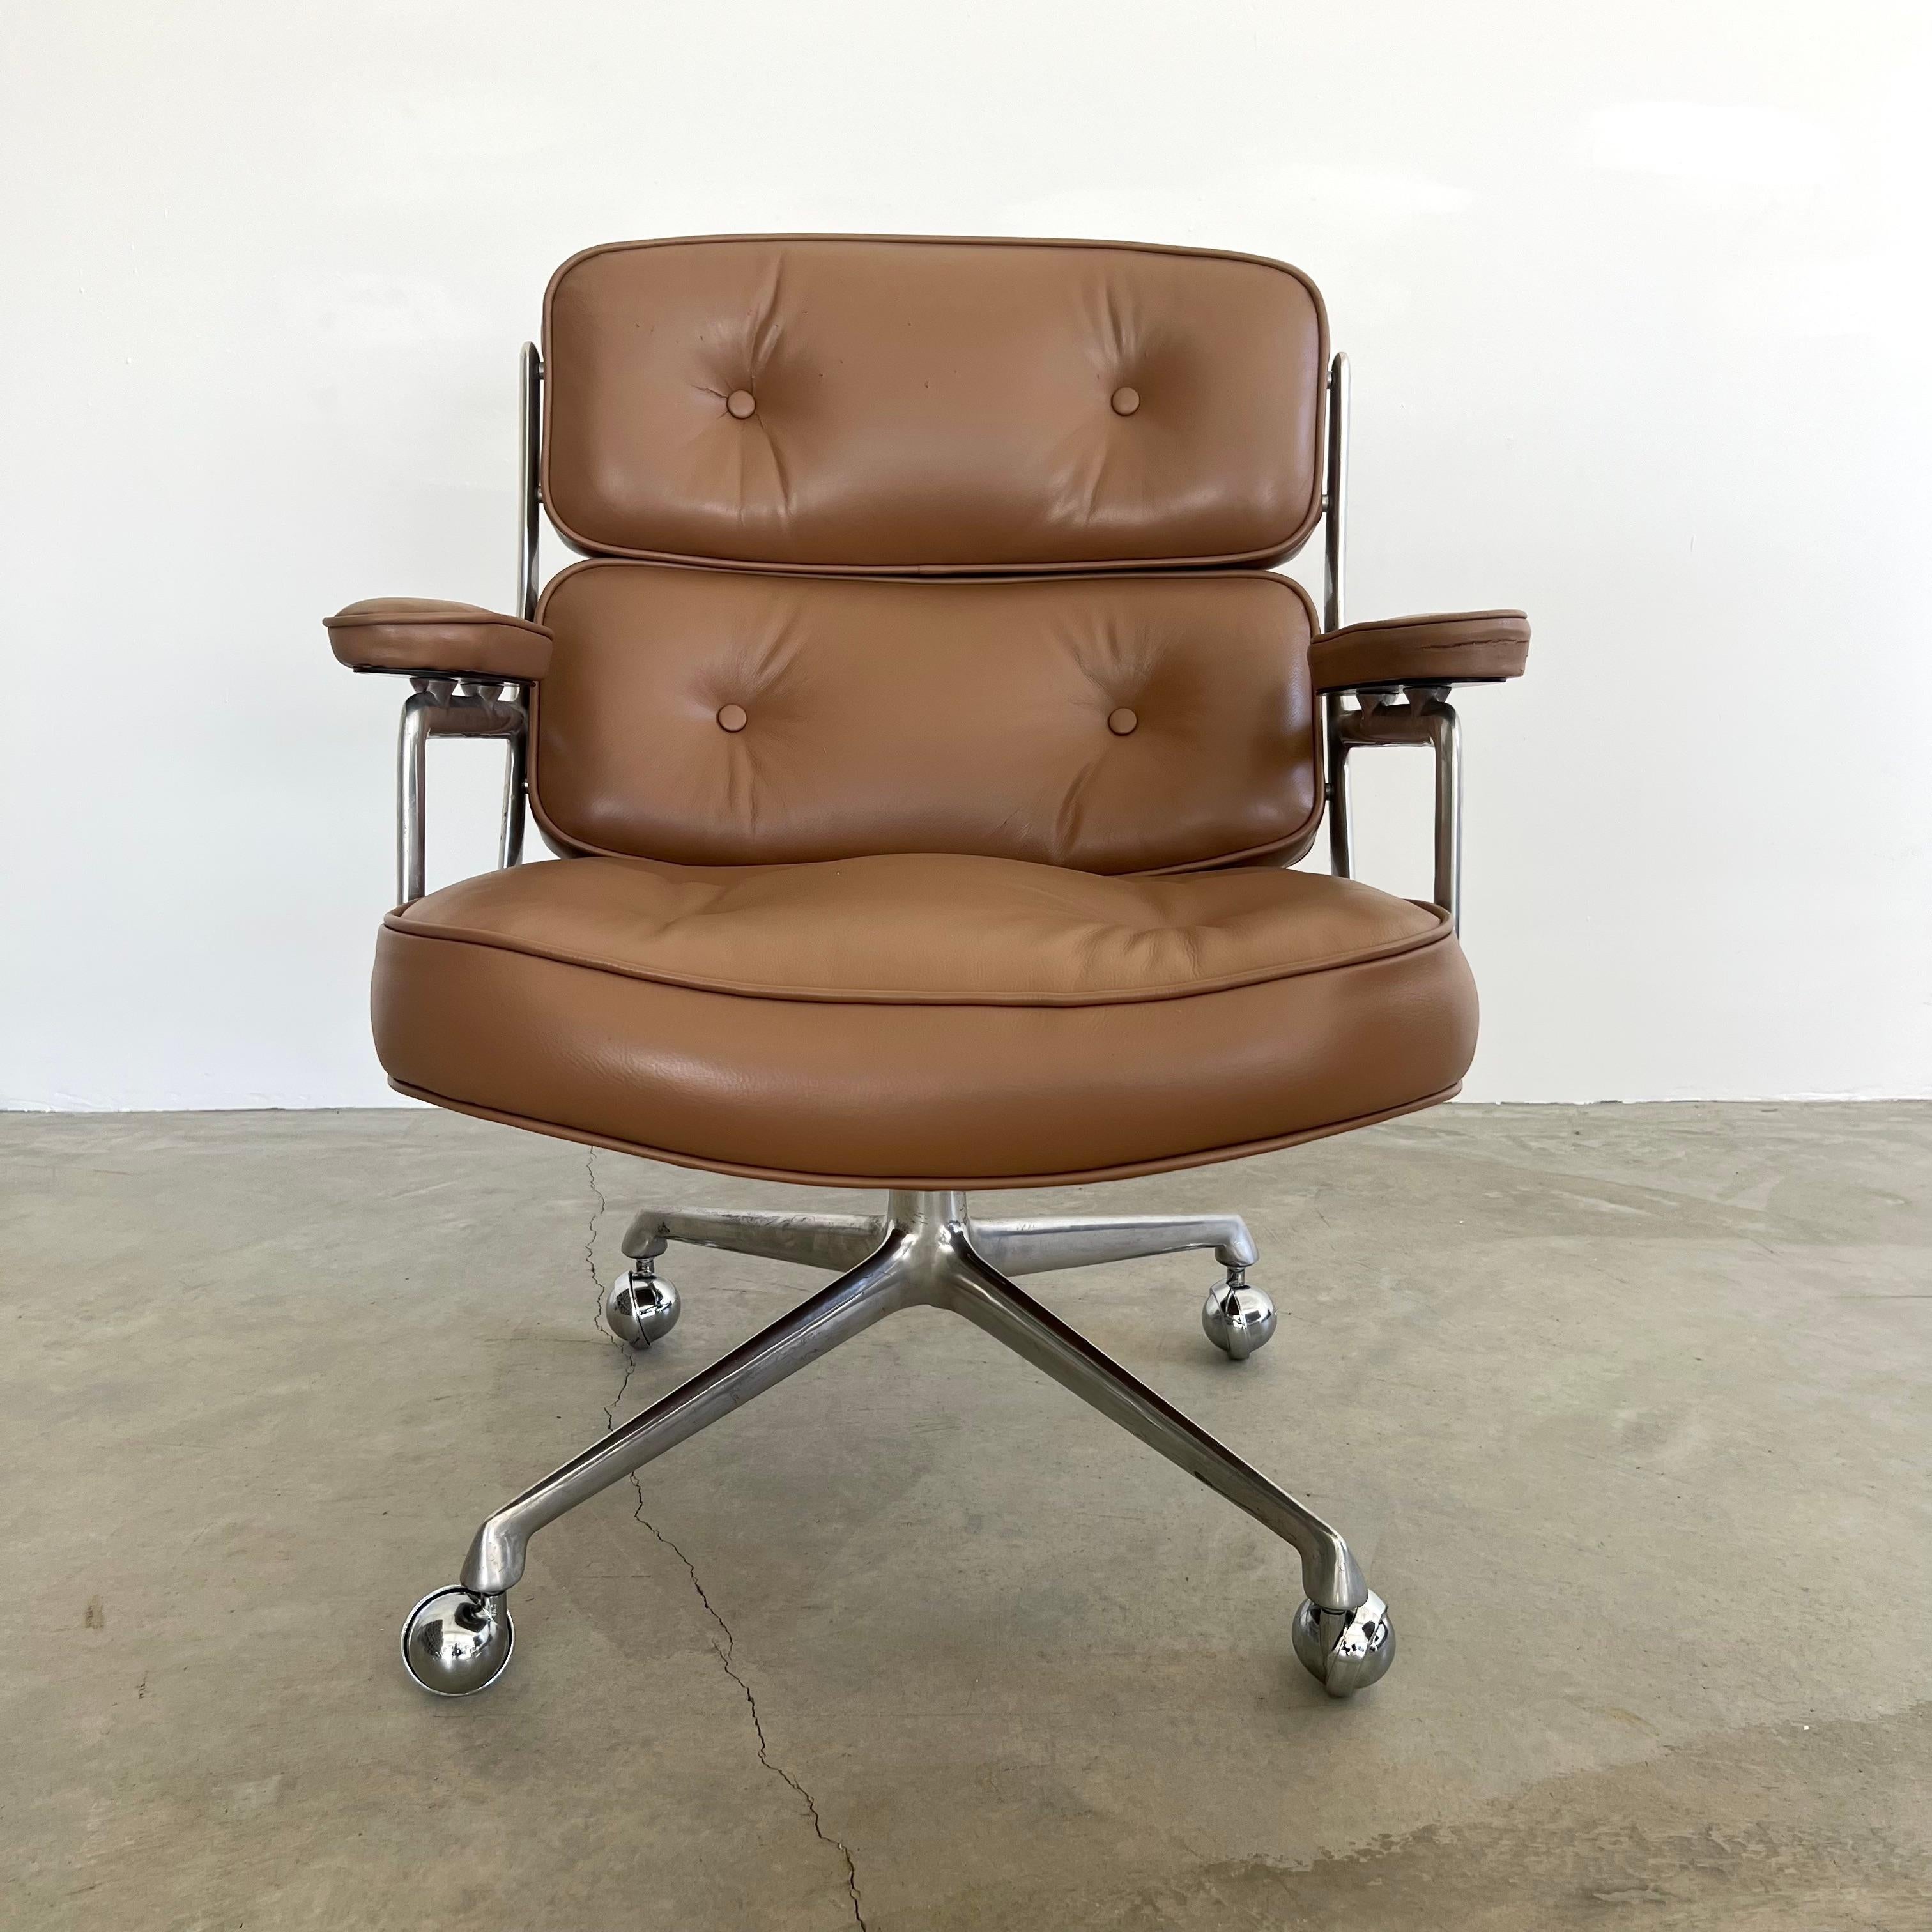 Mid-Century Modern Eames Time Life Chair in Tan Leather for Herman Miller, 1980s USA For Sale